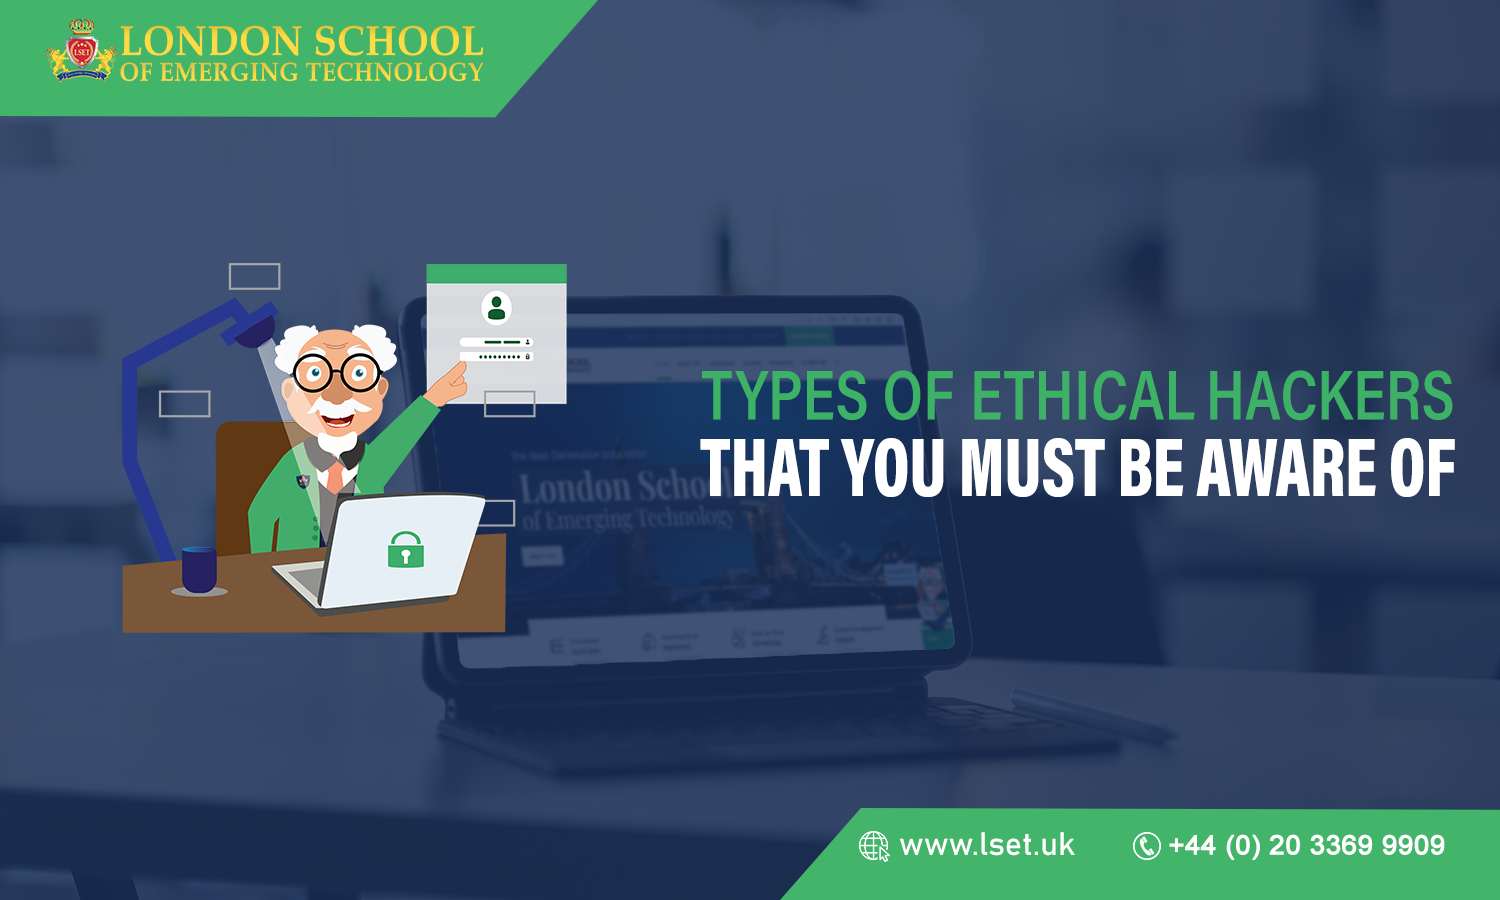 Types of Ethical Hackers that You Must be Aware of